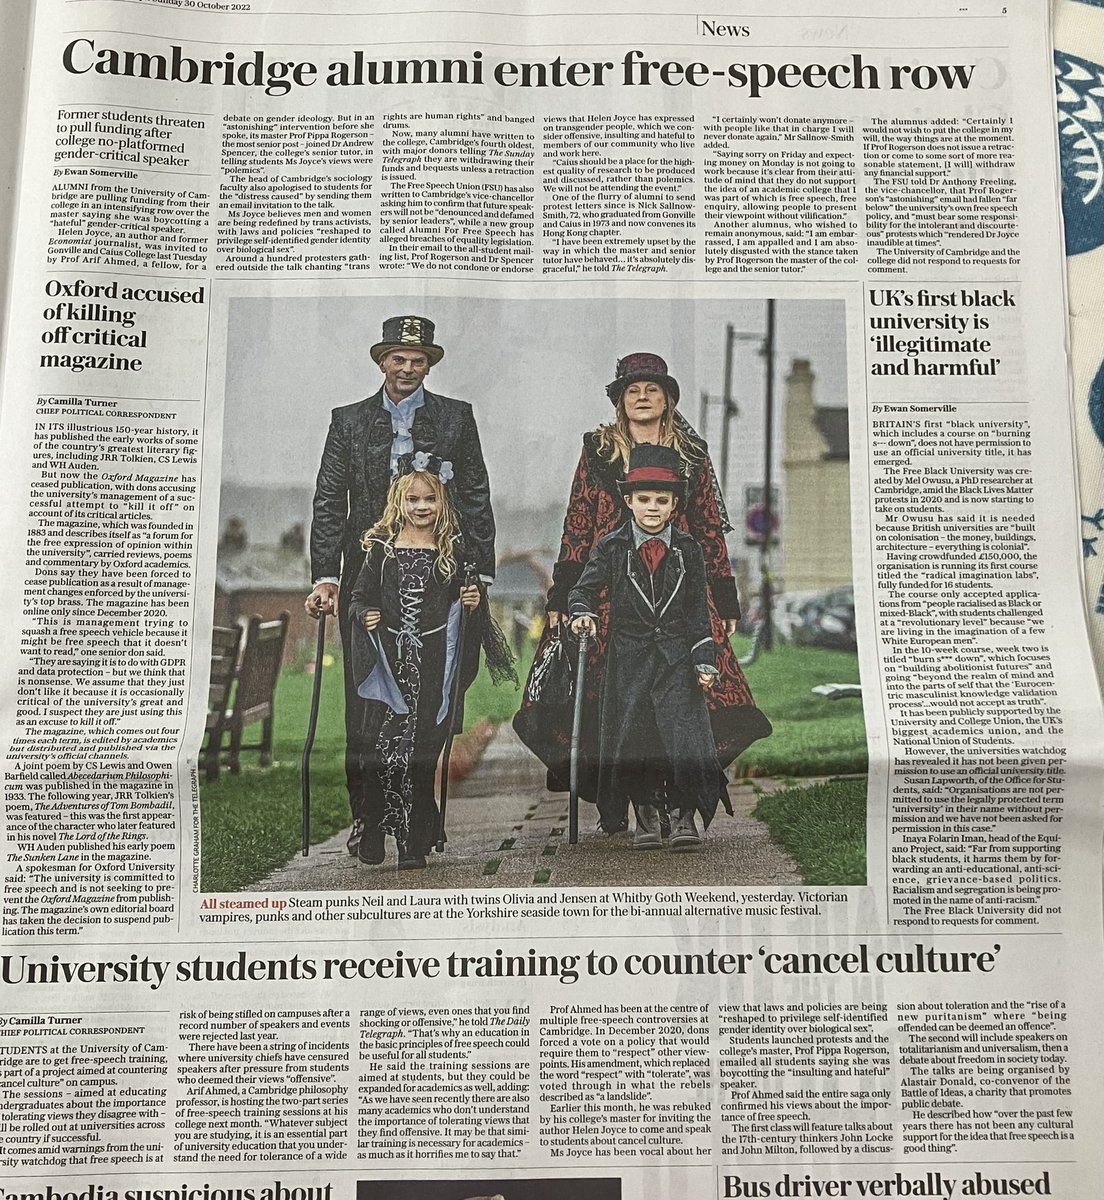 Special page of university and free speech non-stories in the Telegraph. Committee stage of the Lords’ consideration of the HE (FoS) Bill starts tomorrow.